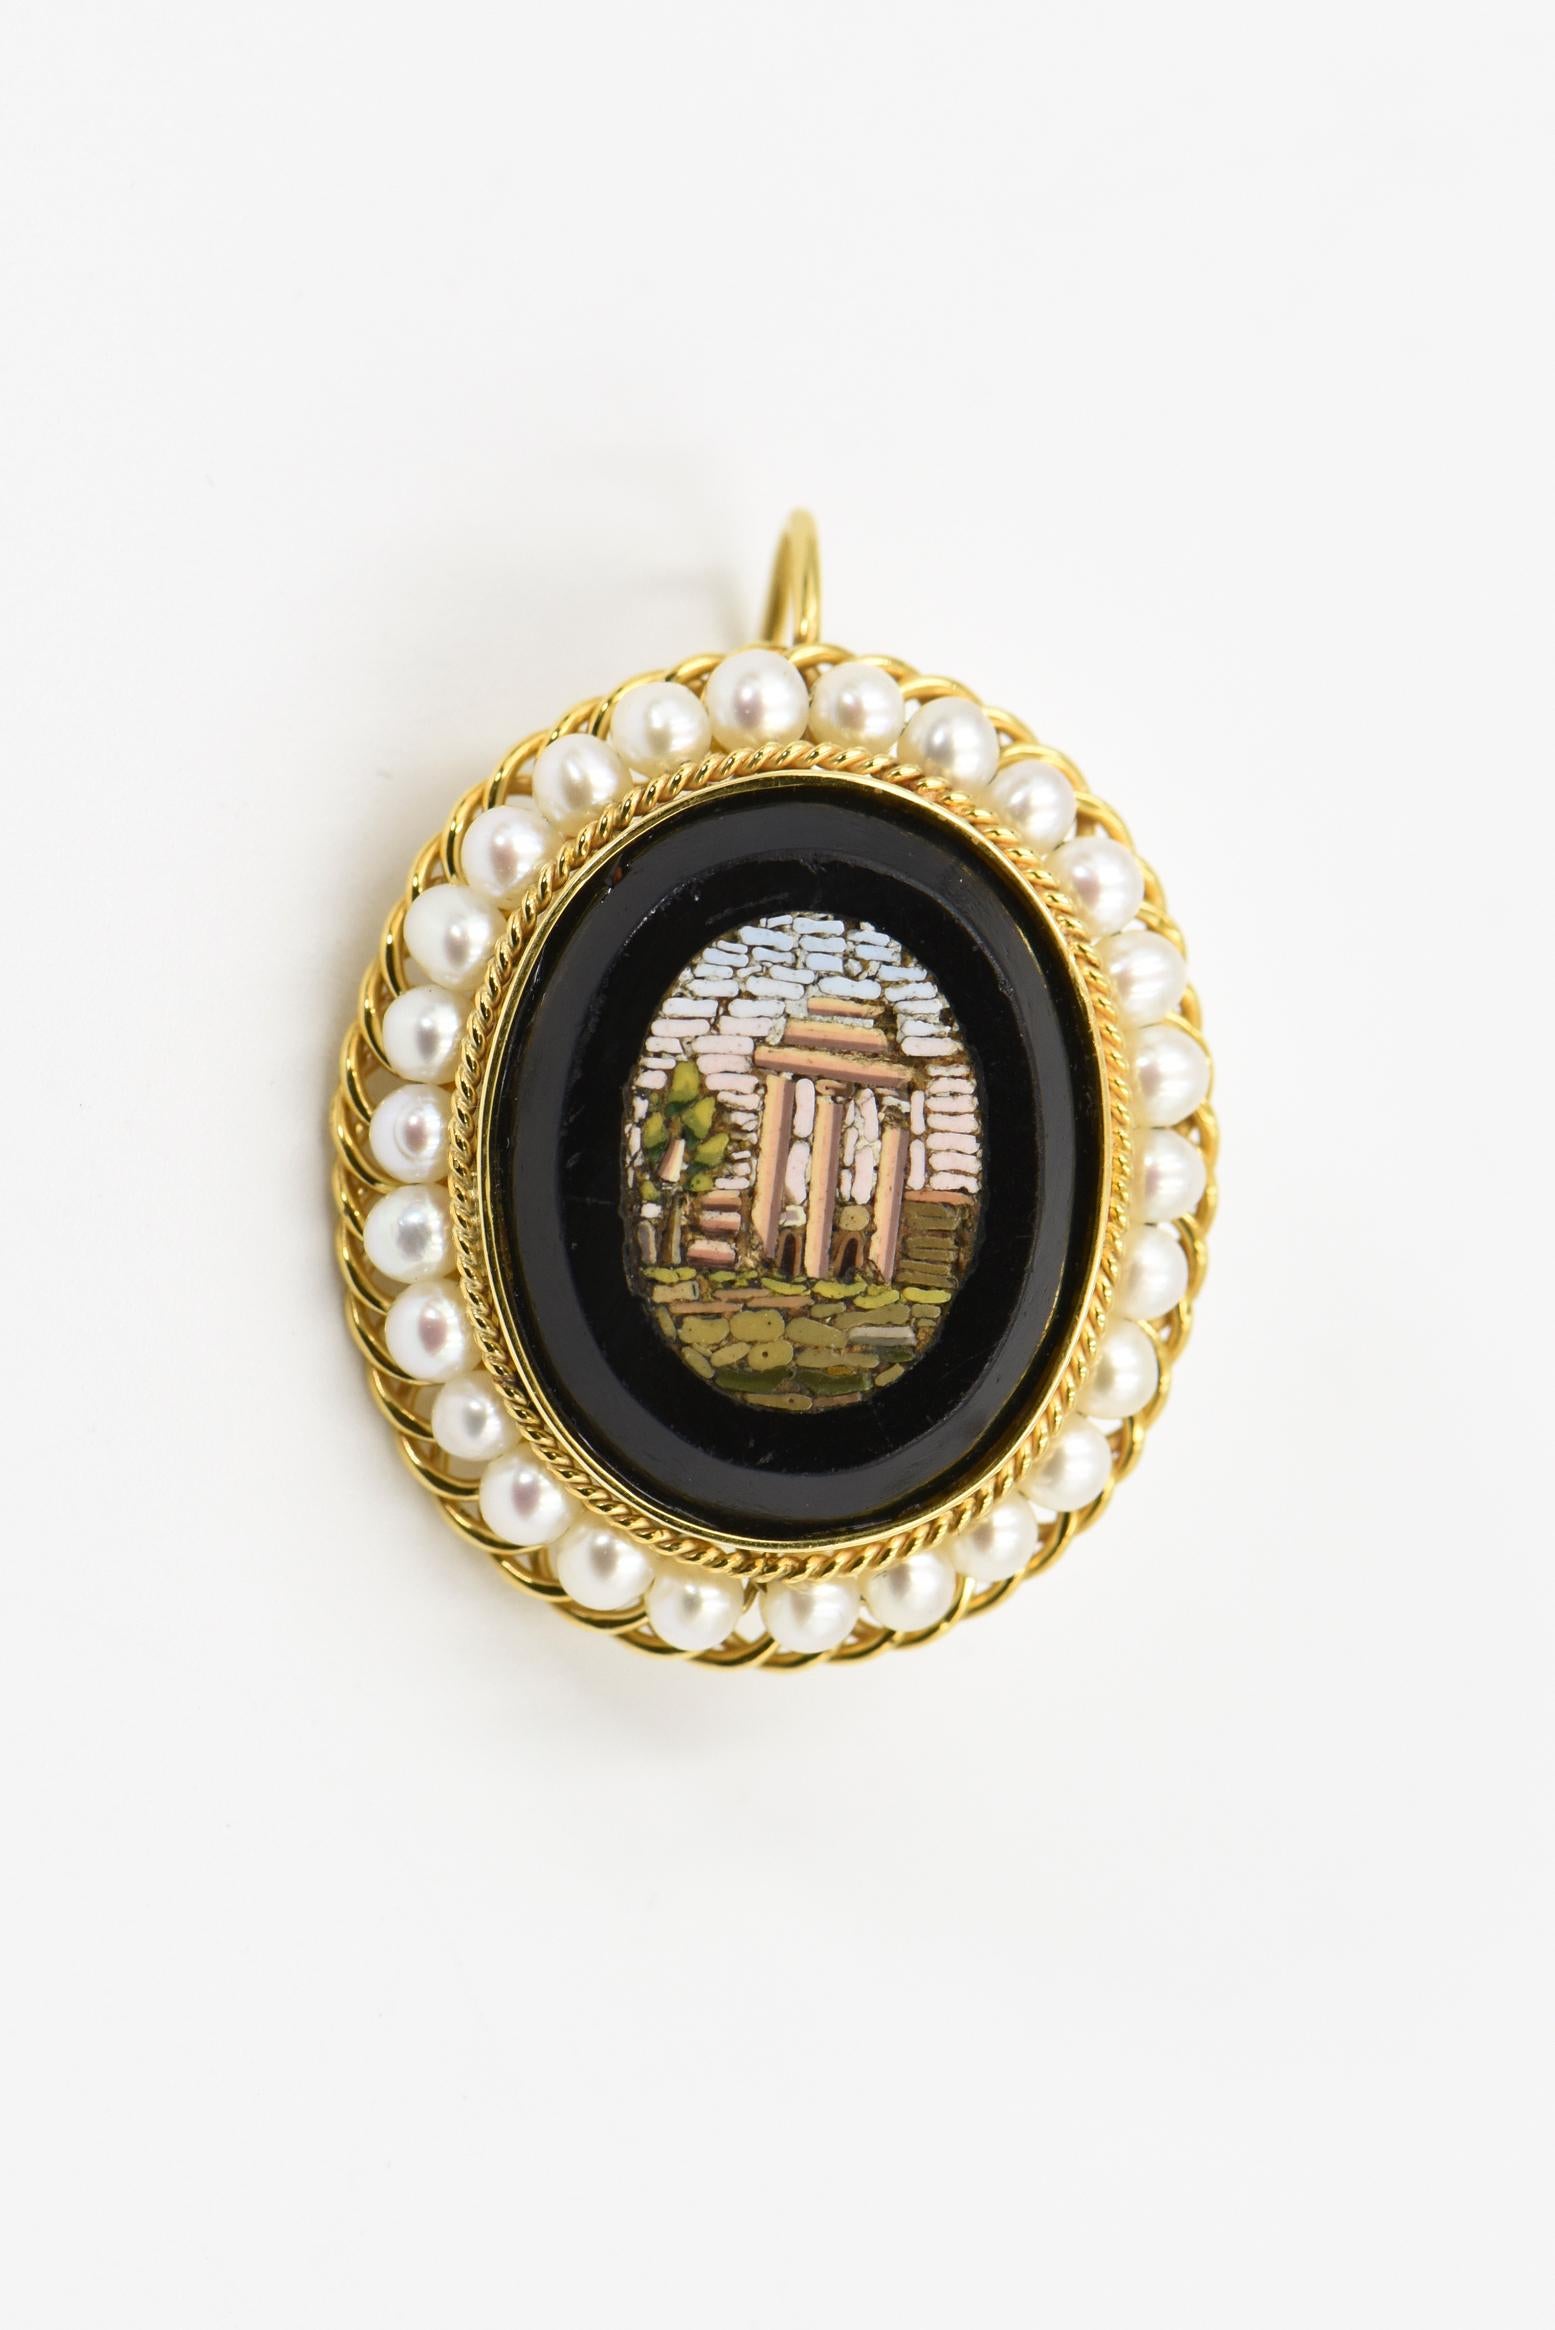 Antique Micromosaic Roman Architecture Scenes Pearl and Gold Earrings In Good Condition For Sale In Miami Beach, FL